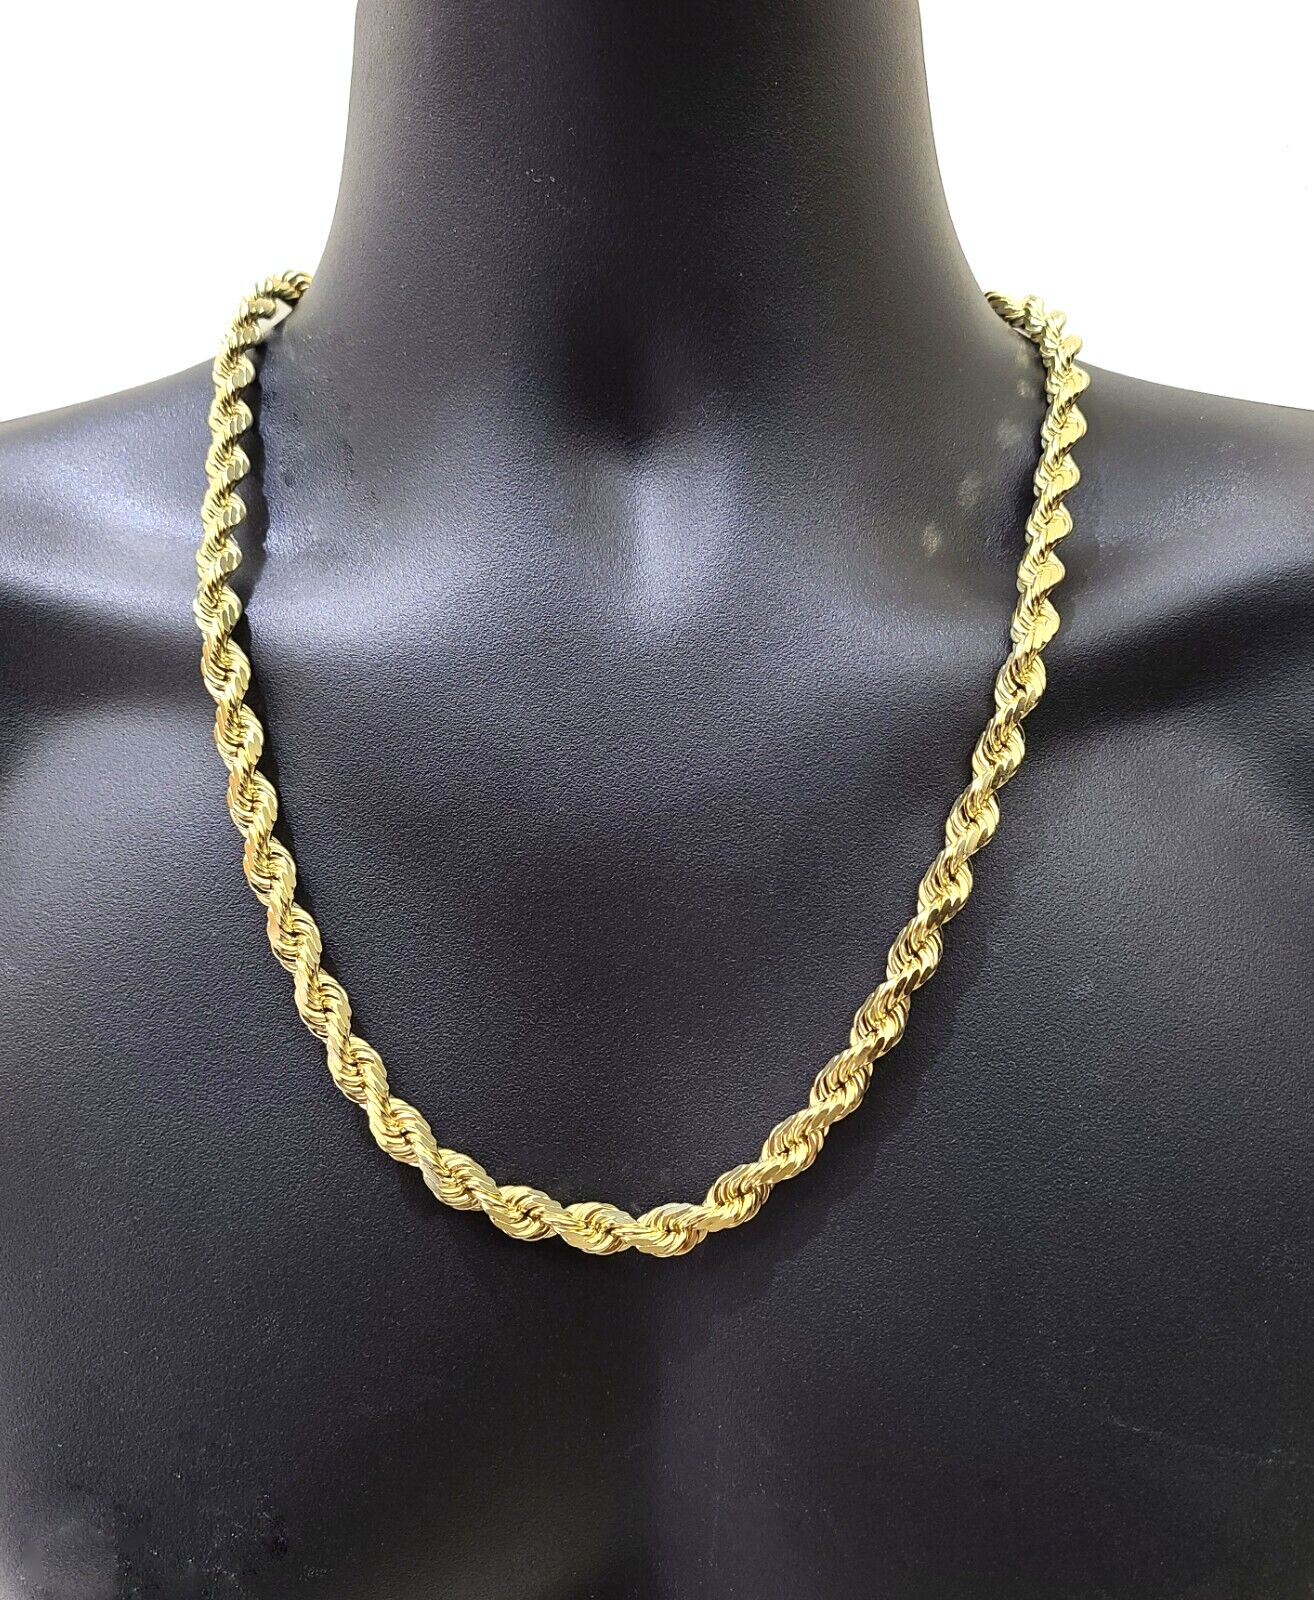 14k Real Solid Yellow Gold Necklace Rope Chain 7mm 24 Inch 14kt